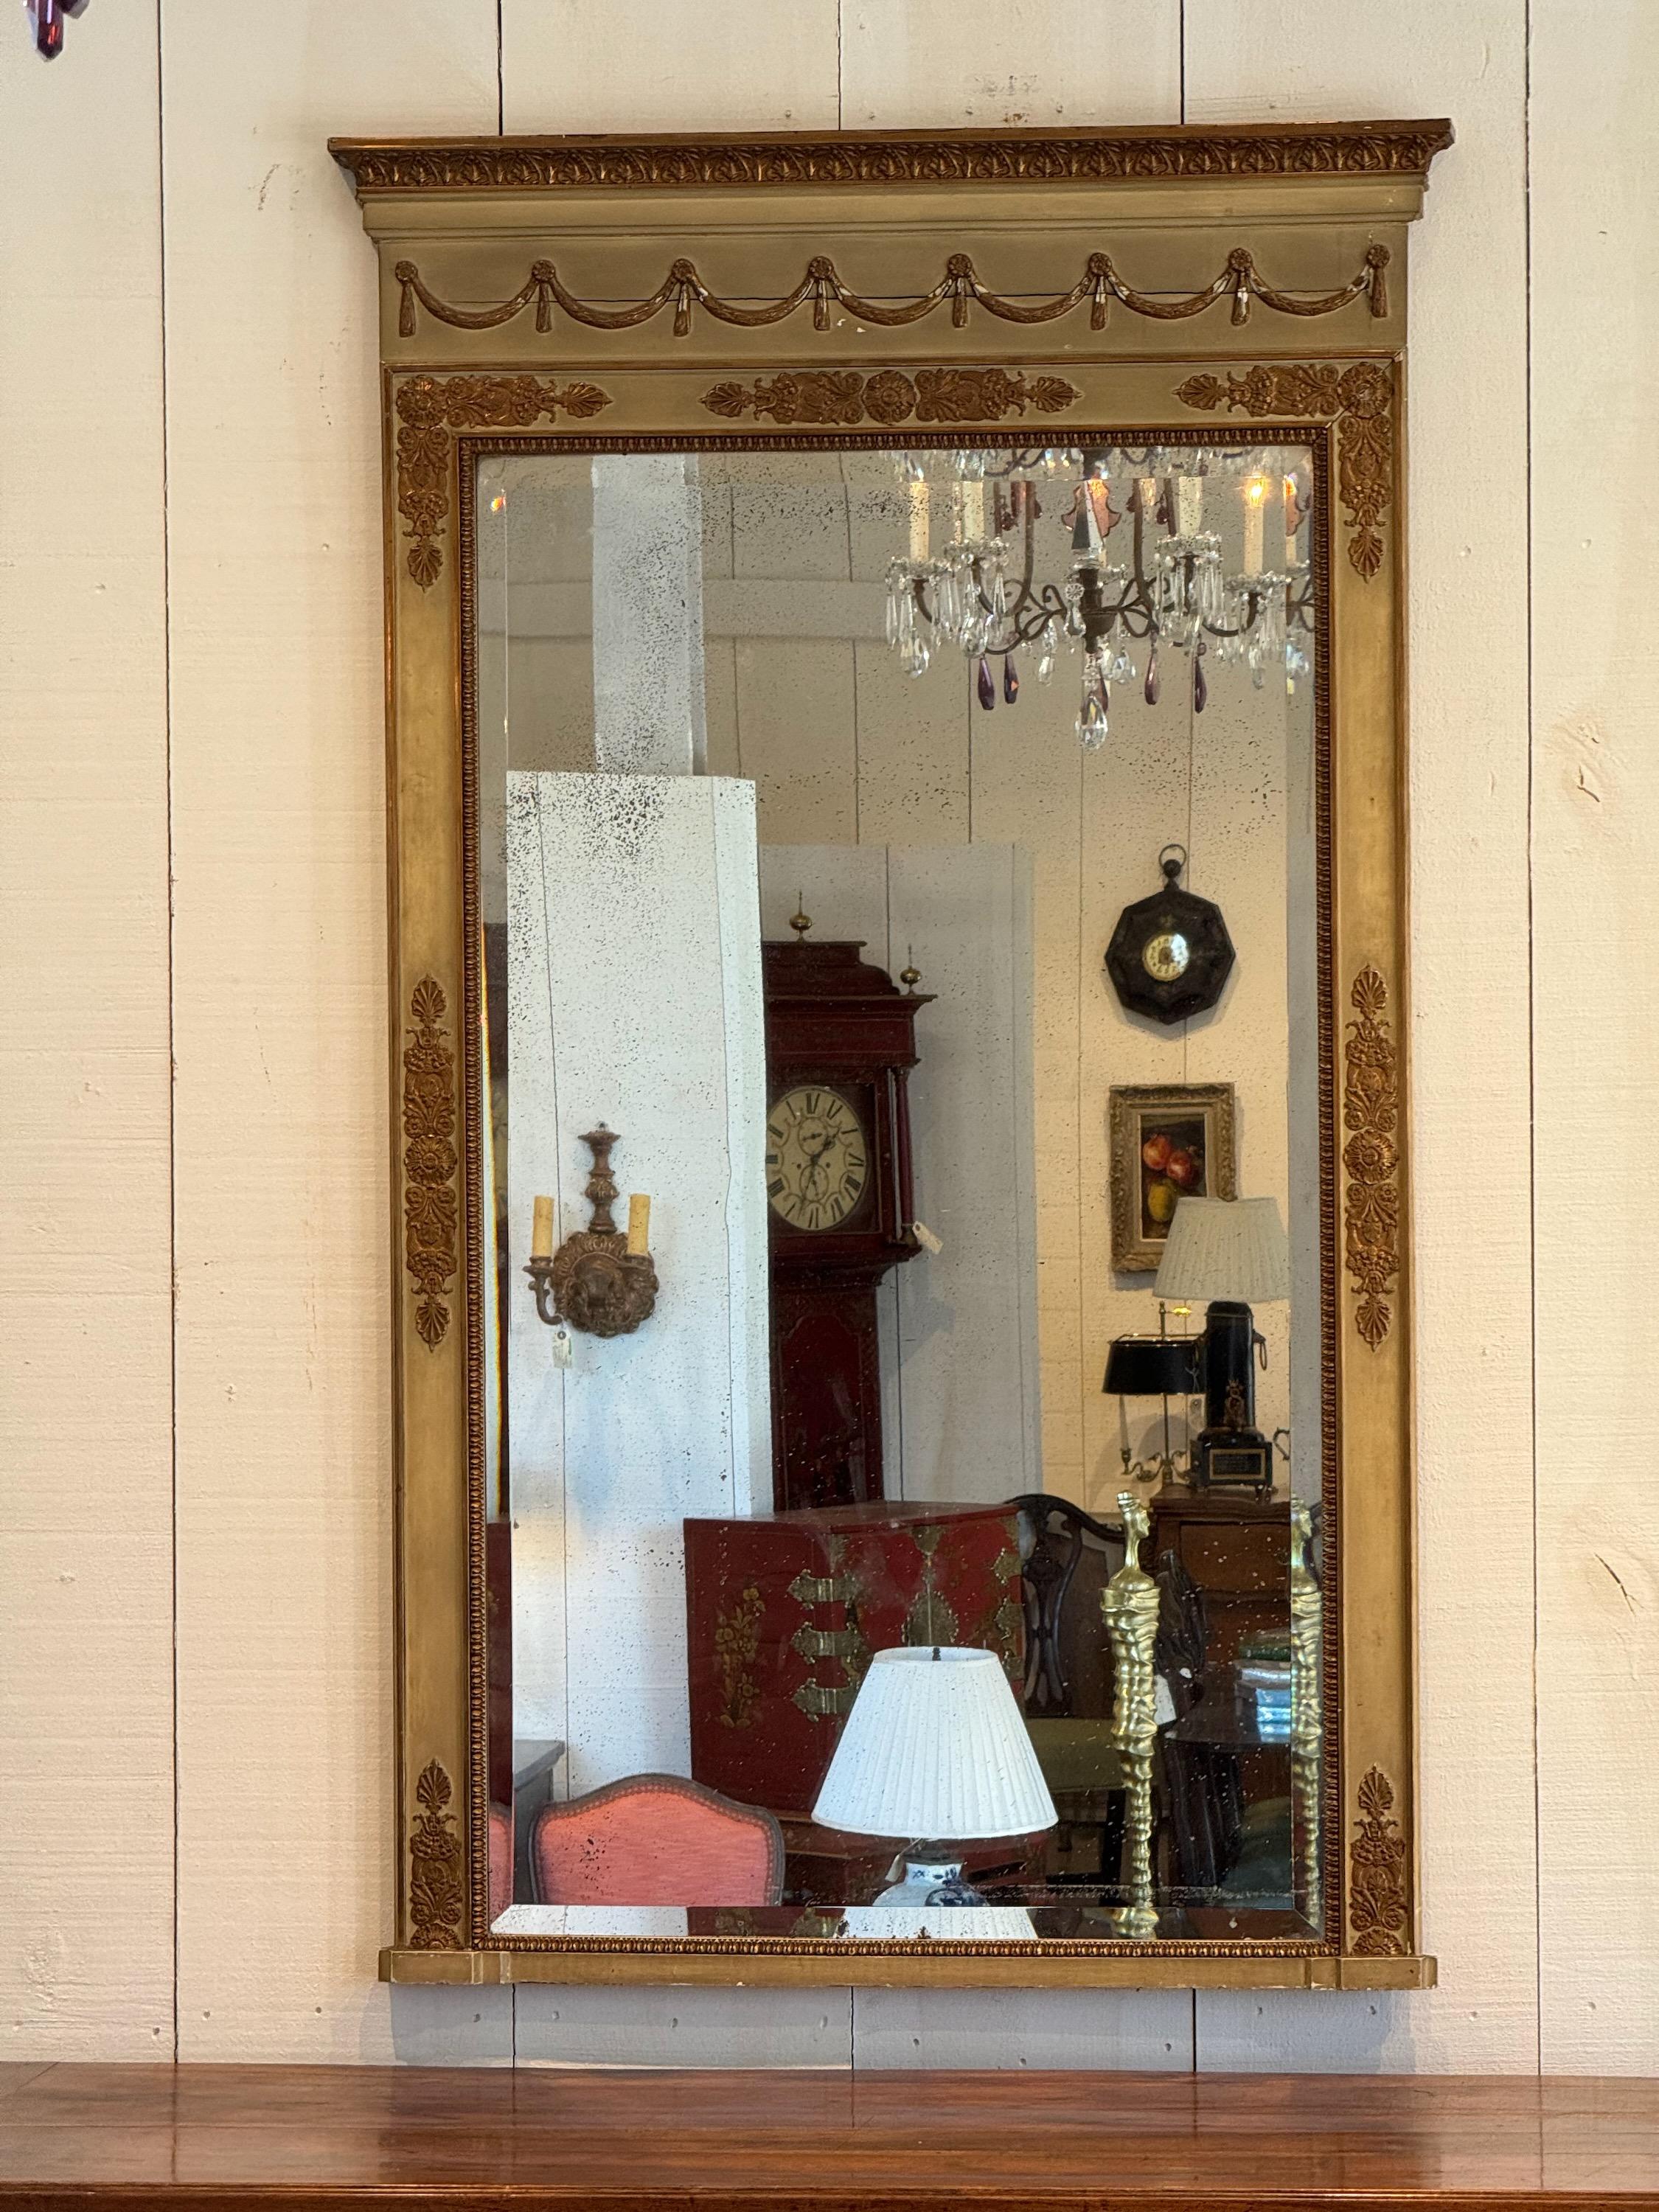 A paint and gilt decorated mirror. The light wear to paint and gilding adds much charm.